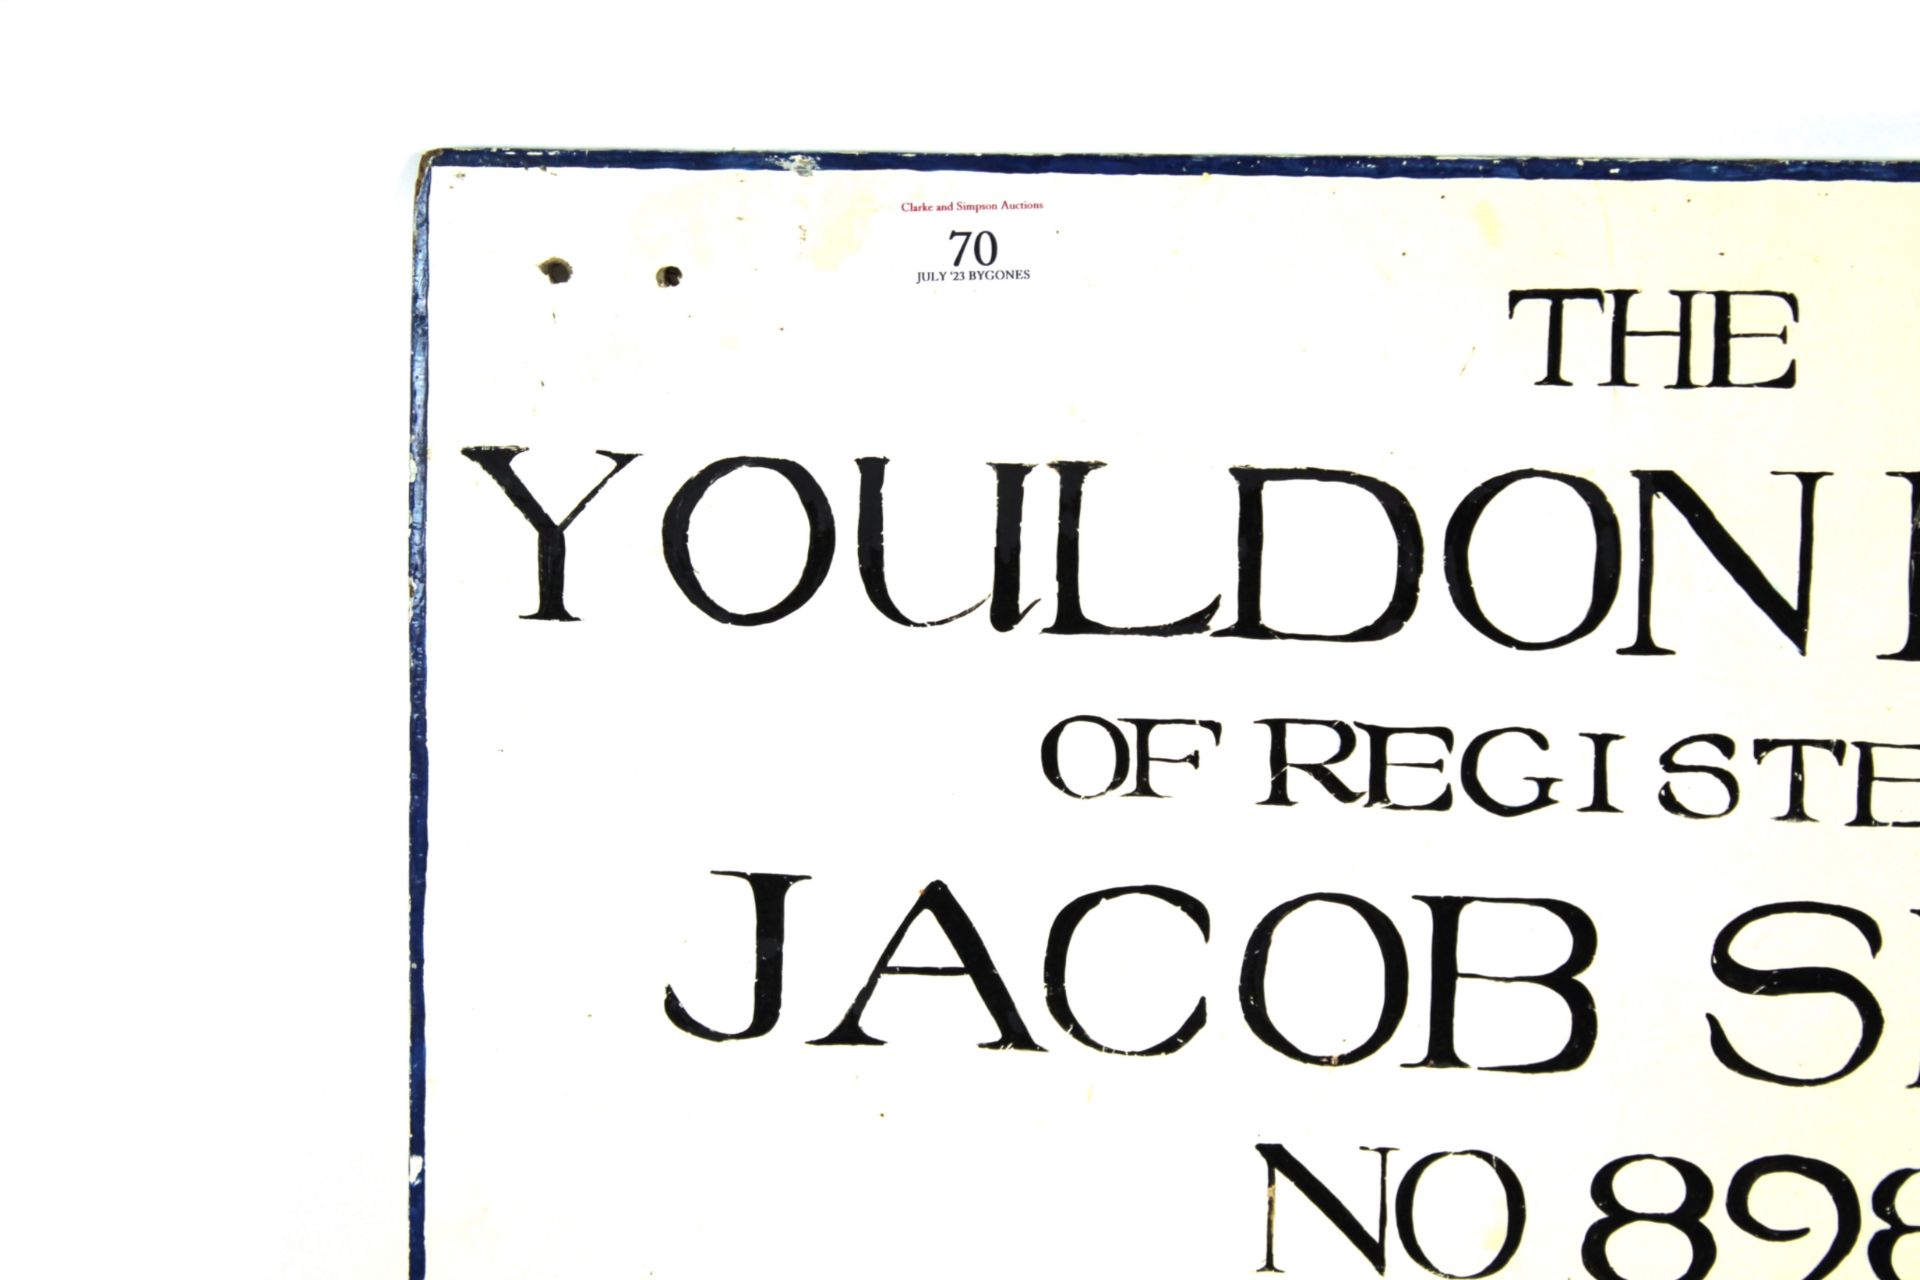 A painted wooden farm sign for the "Youldon Flock - Image 2 of 10